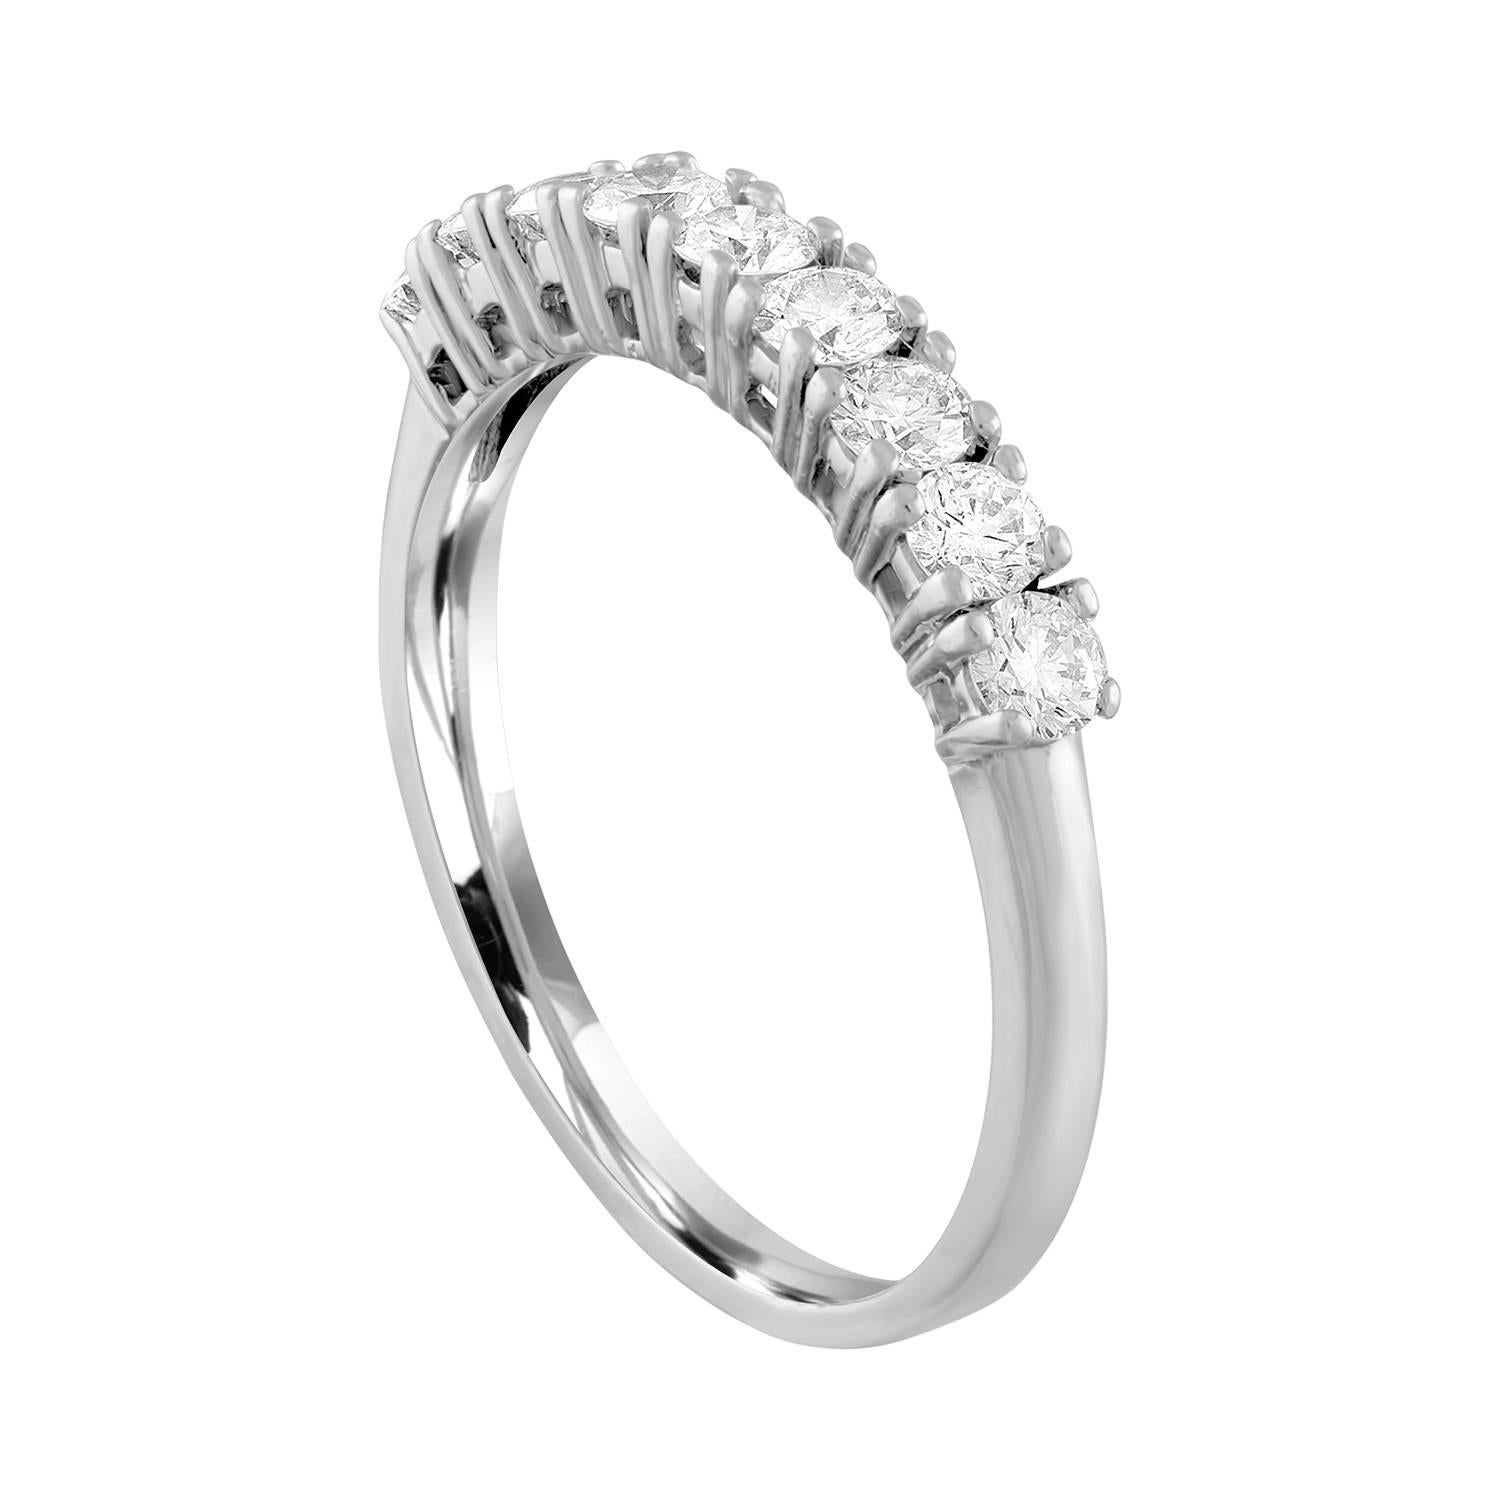 Very Beautiful Half Diamond Band Ring.
The ring is 14K White Gold.
There are 9 Round Cut Diamonds prong set.
There are 0.90 Carats In Diamonds G/H SI.
The ring is a size 9.5, sizable. 
The band is 3.30 mm wide and tapers down to 2.03 mm.
The ring